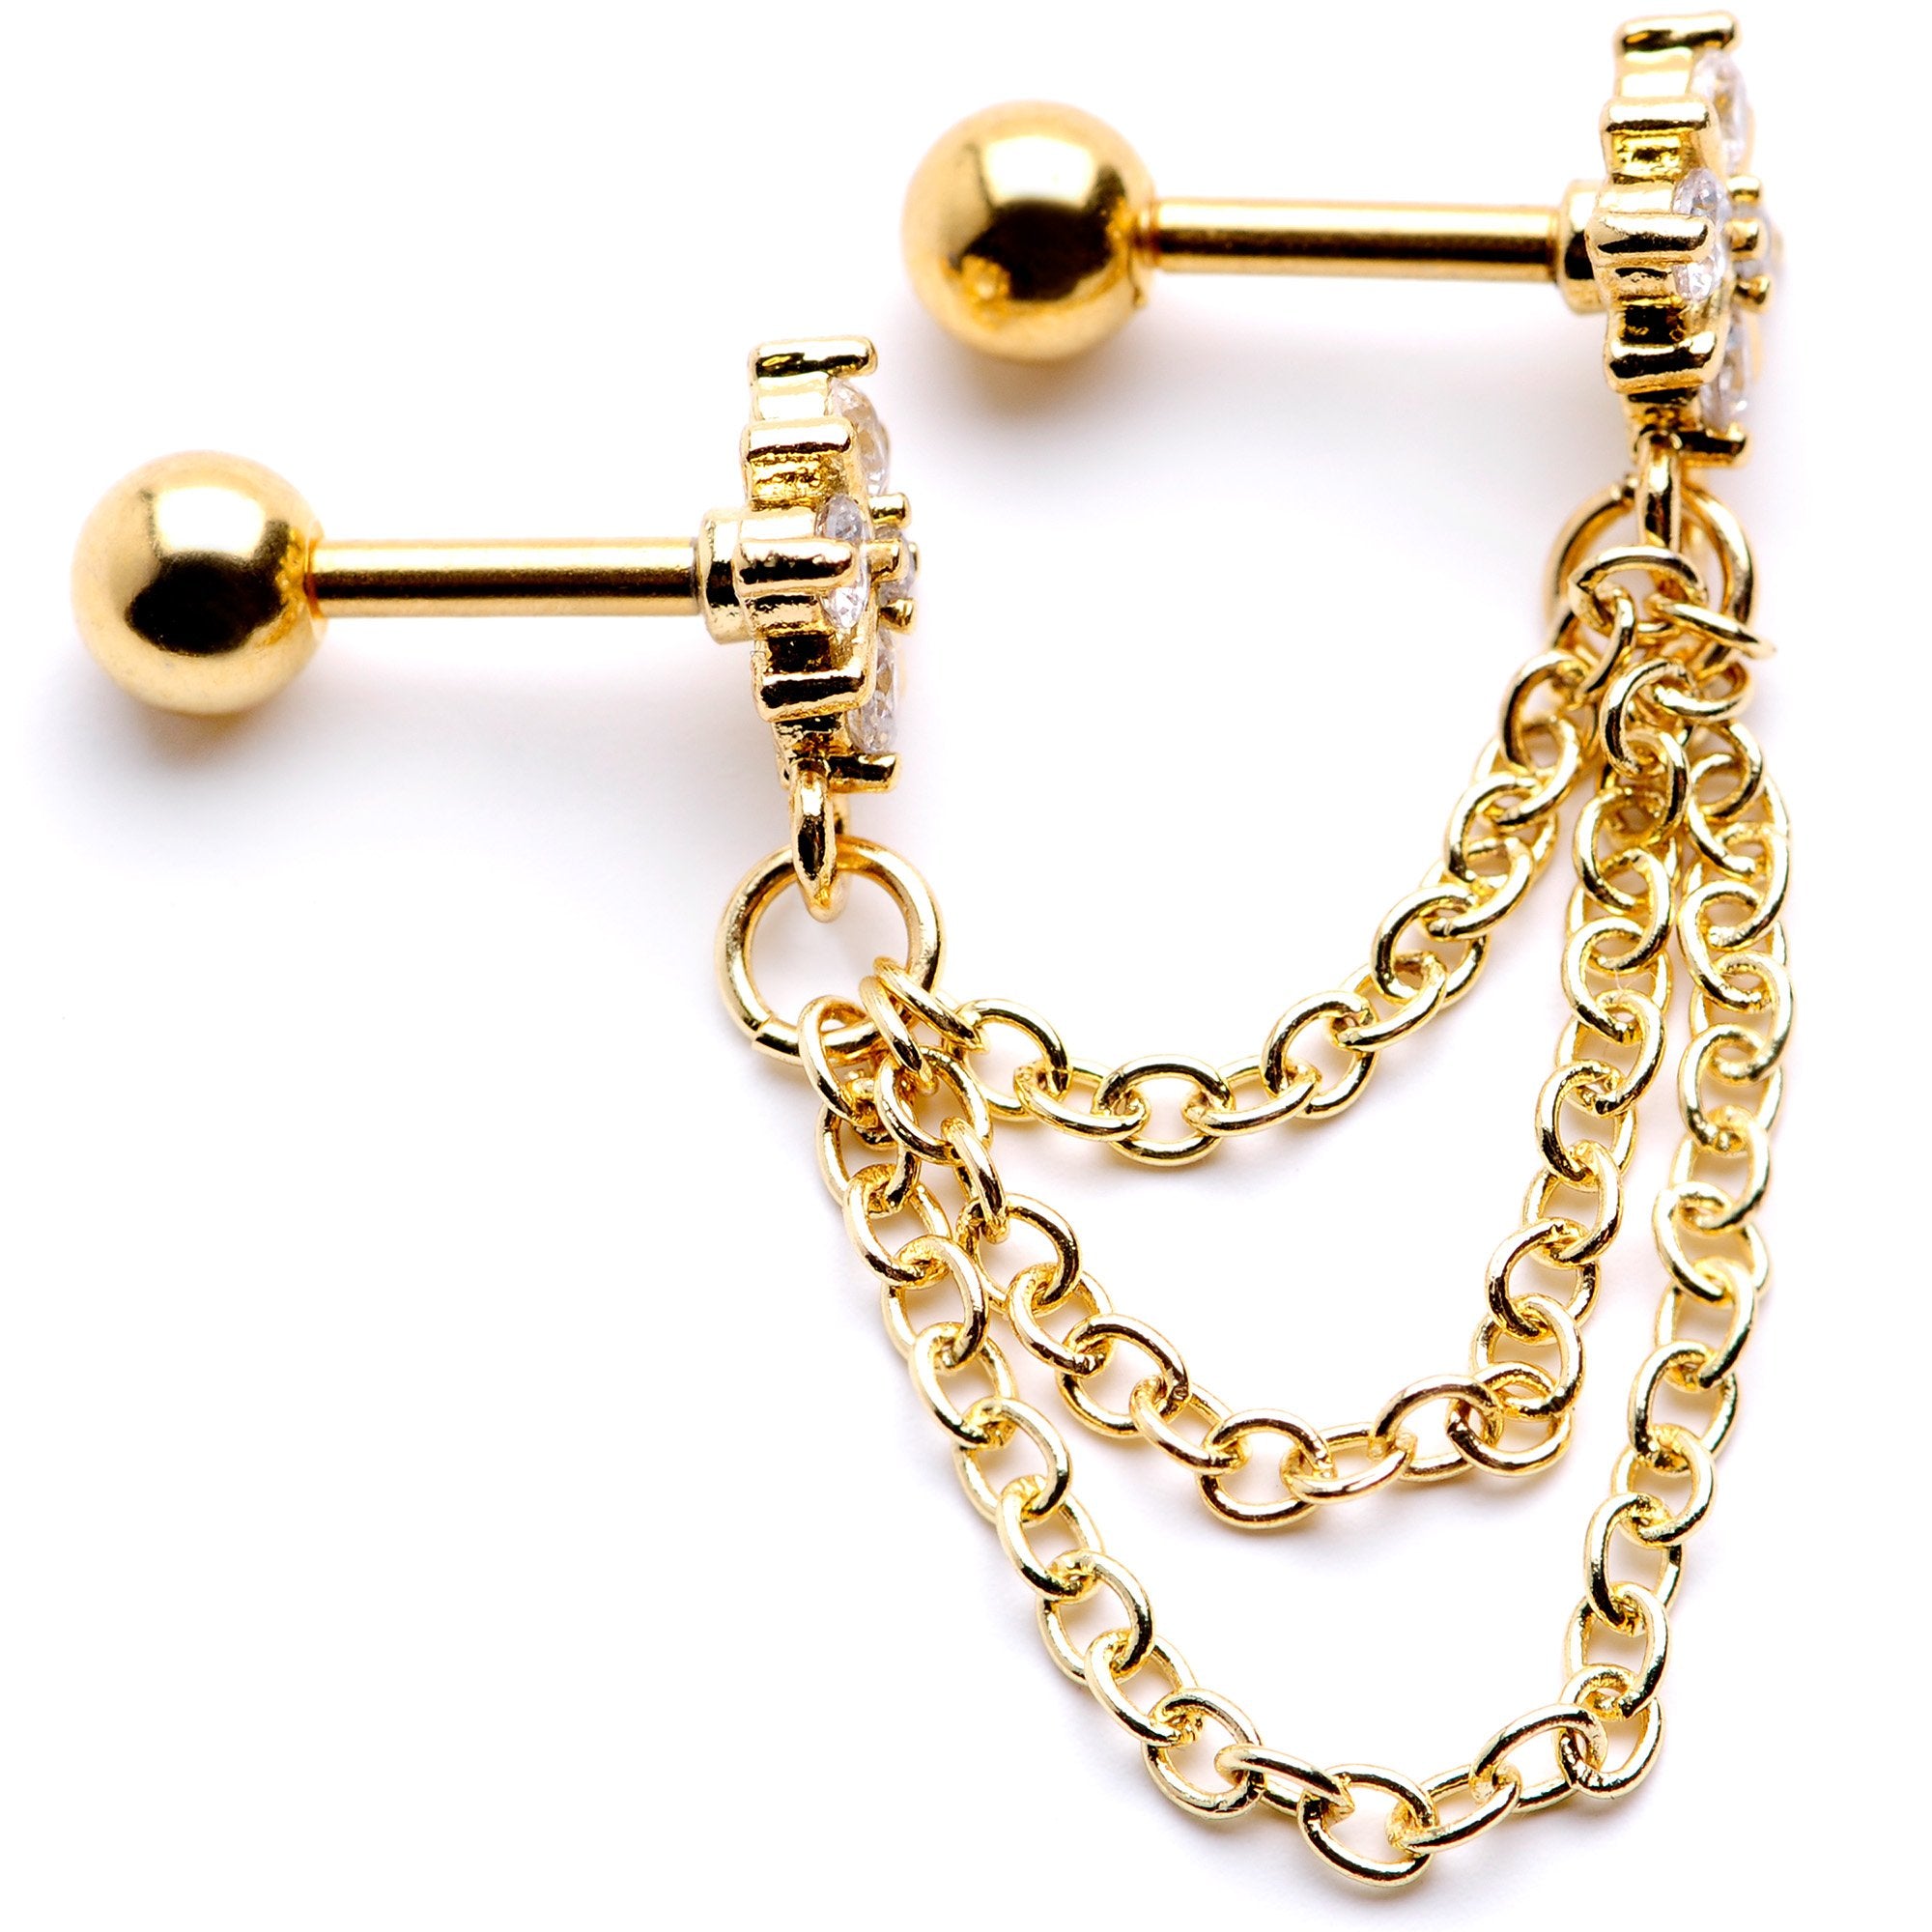 16 Gauge 1/4 Clear Gem Gold PVD Decadence Cartilage Chain Earring